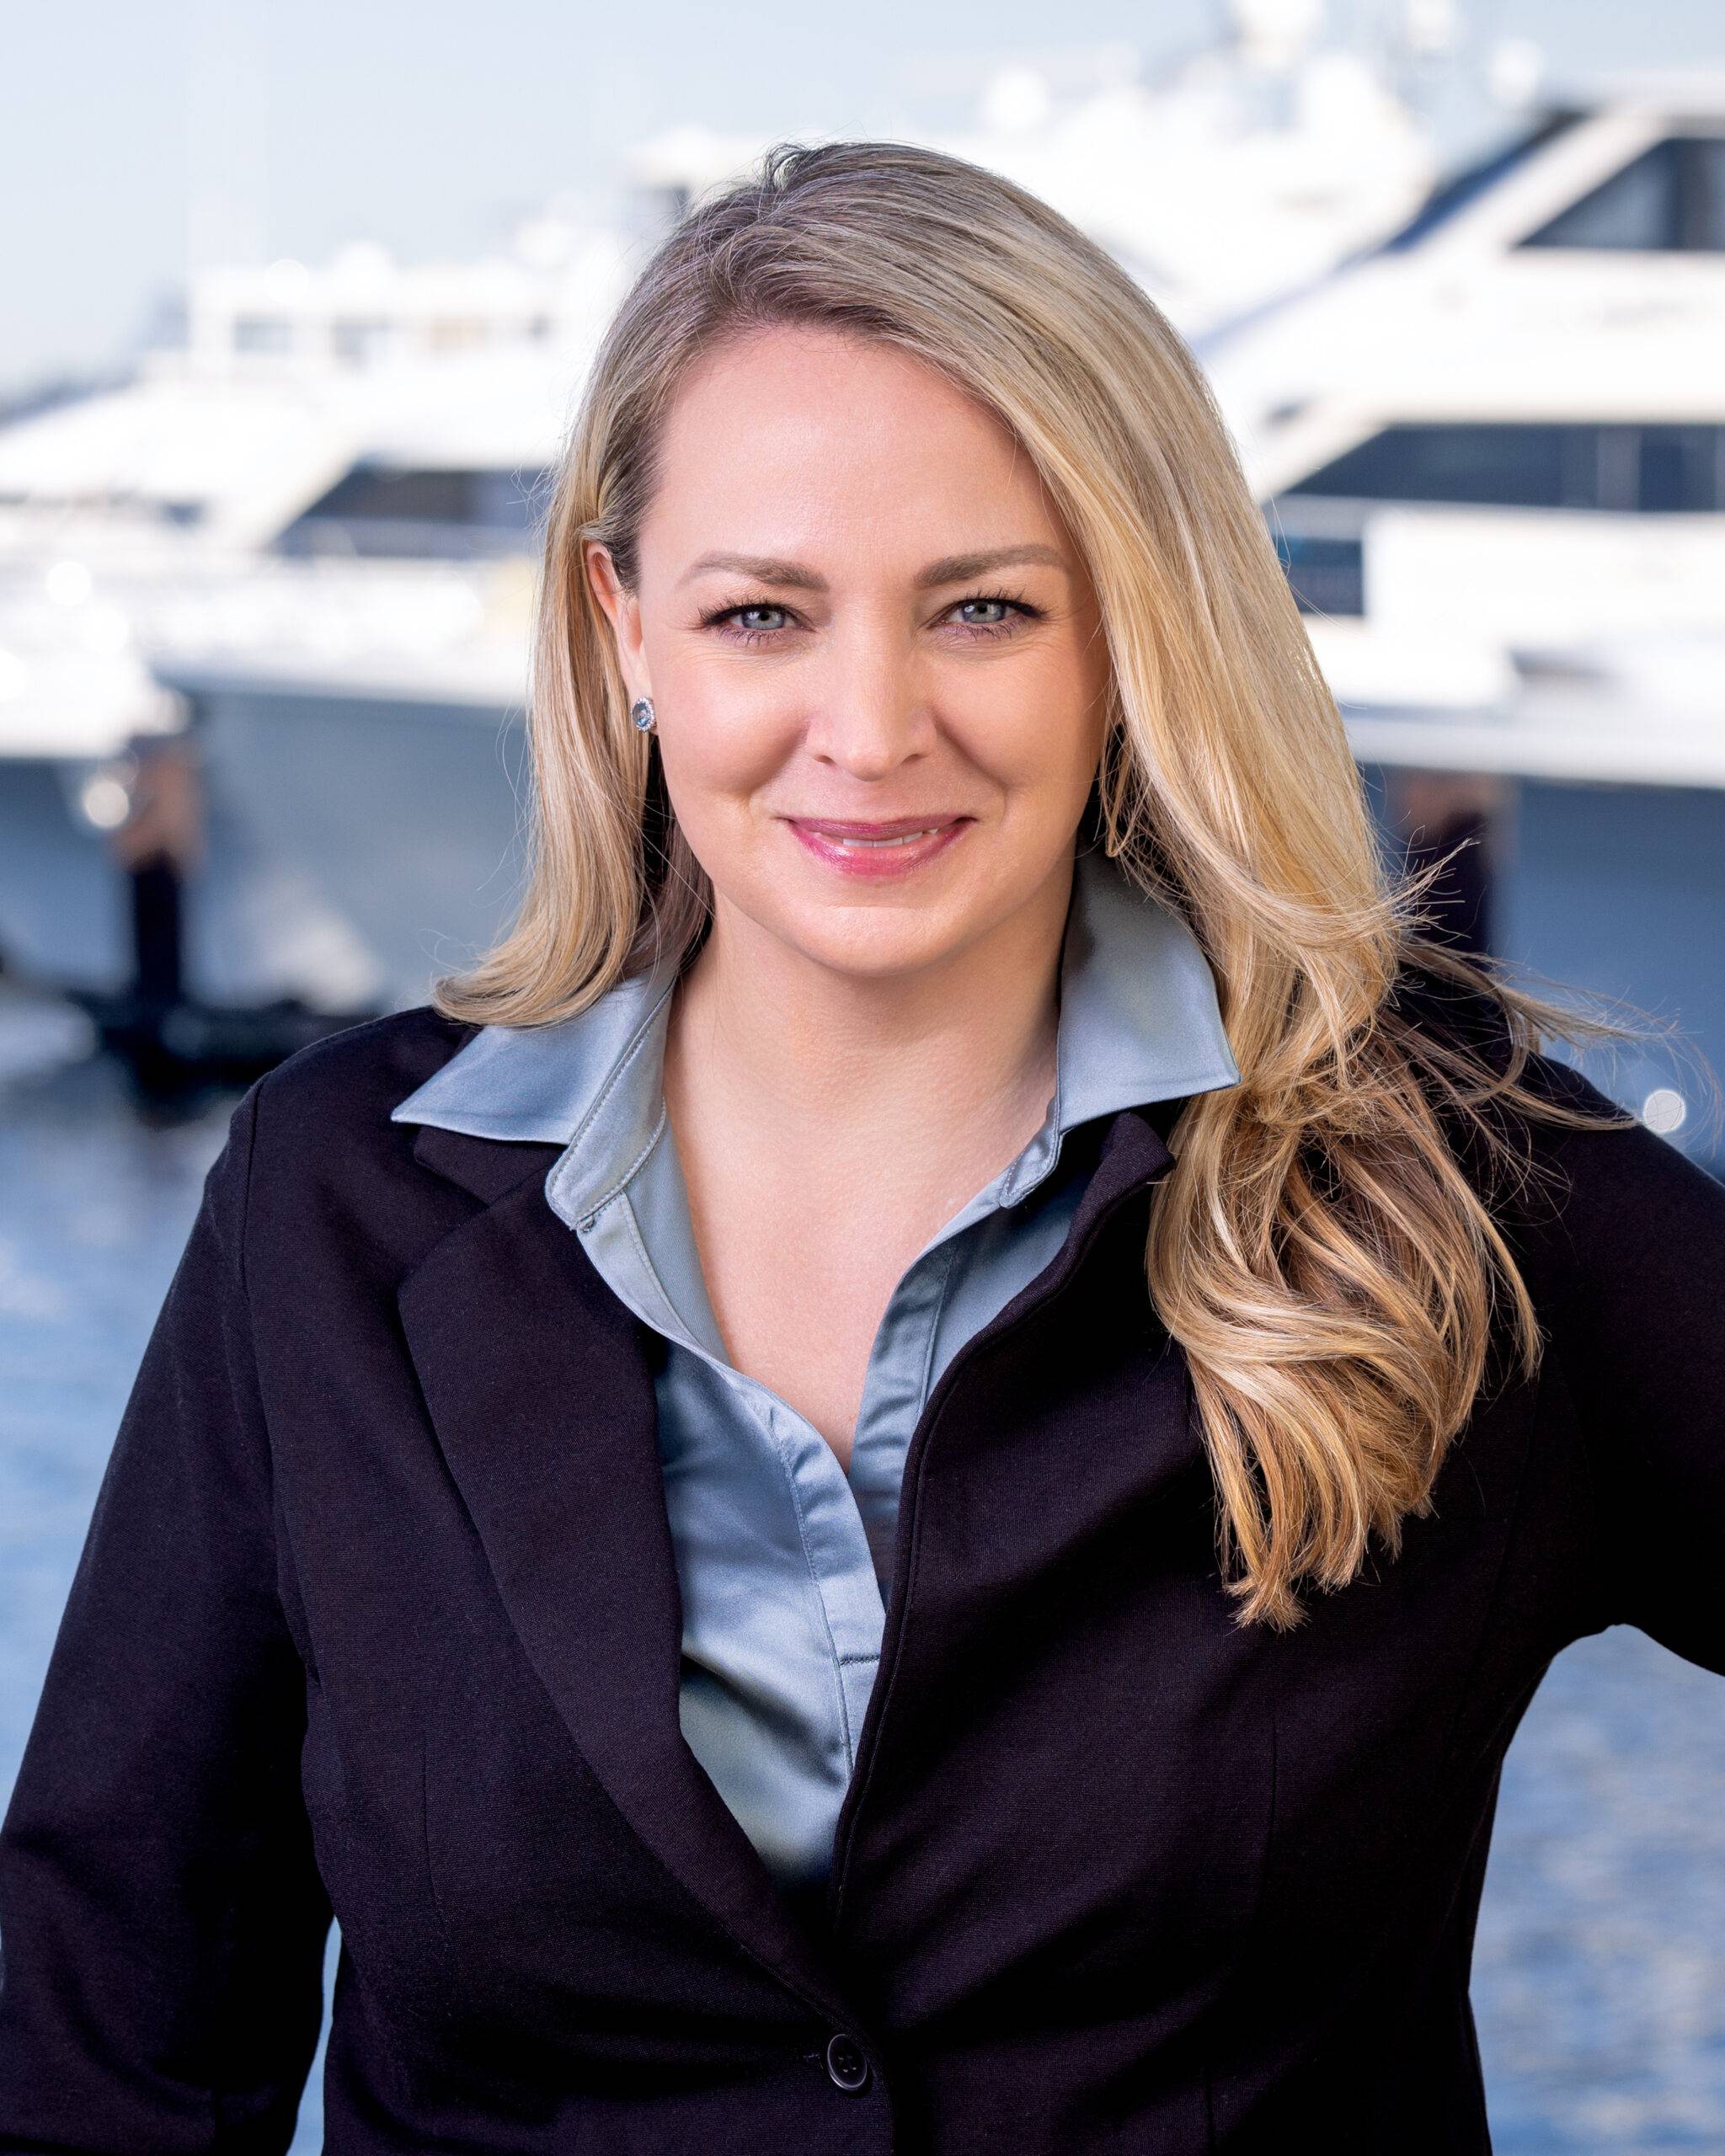 Headshot of Karli Houle, Director of Operations at Northwest Yacht Brokers Association, Seattle Wa. Photographed by Ludeman Photographic (http://ludemanphotographic.com) of Sammamish Wa.